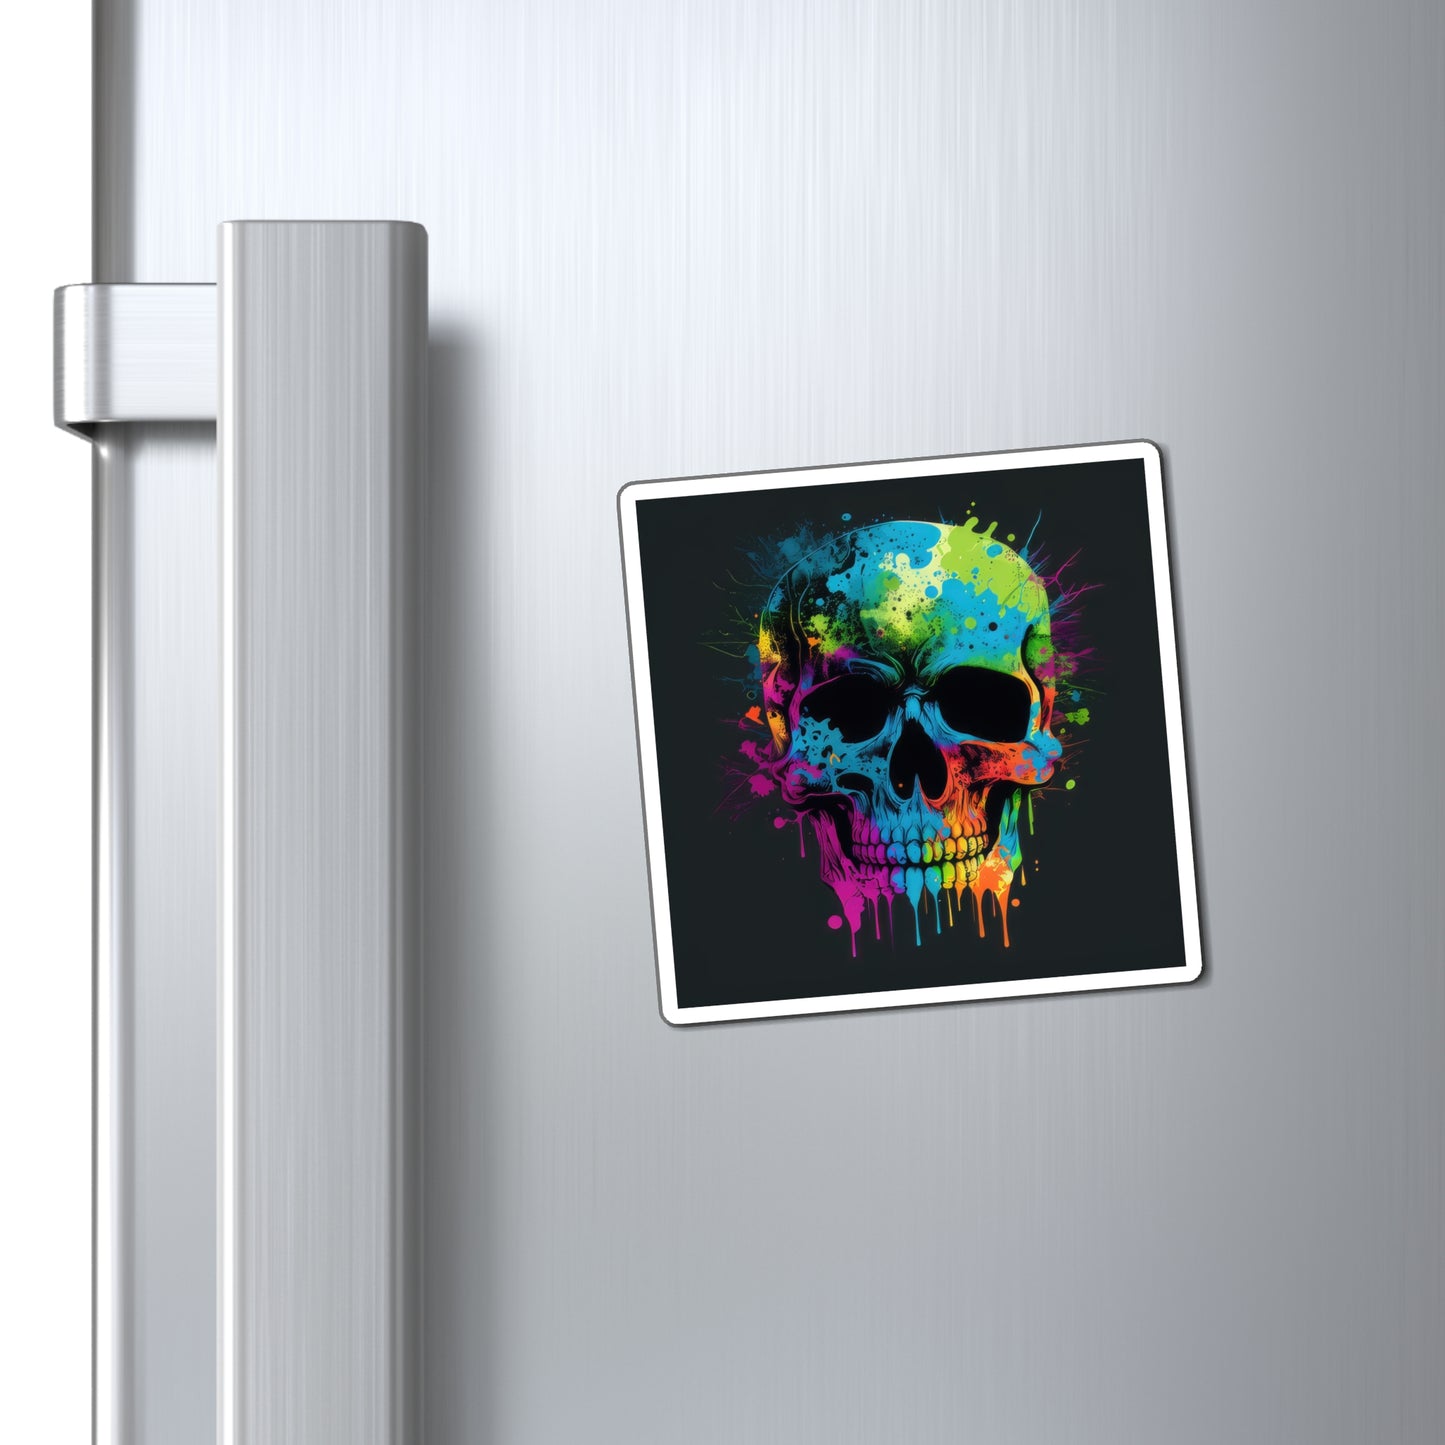 Bold And Beautiful Tie Dye Skulls, Style 1 Magnets